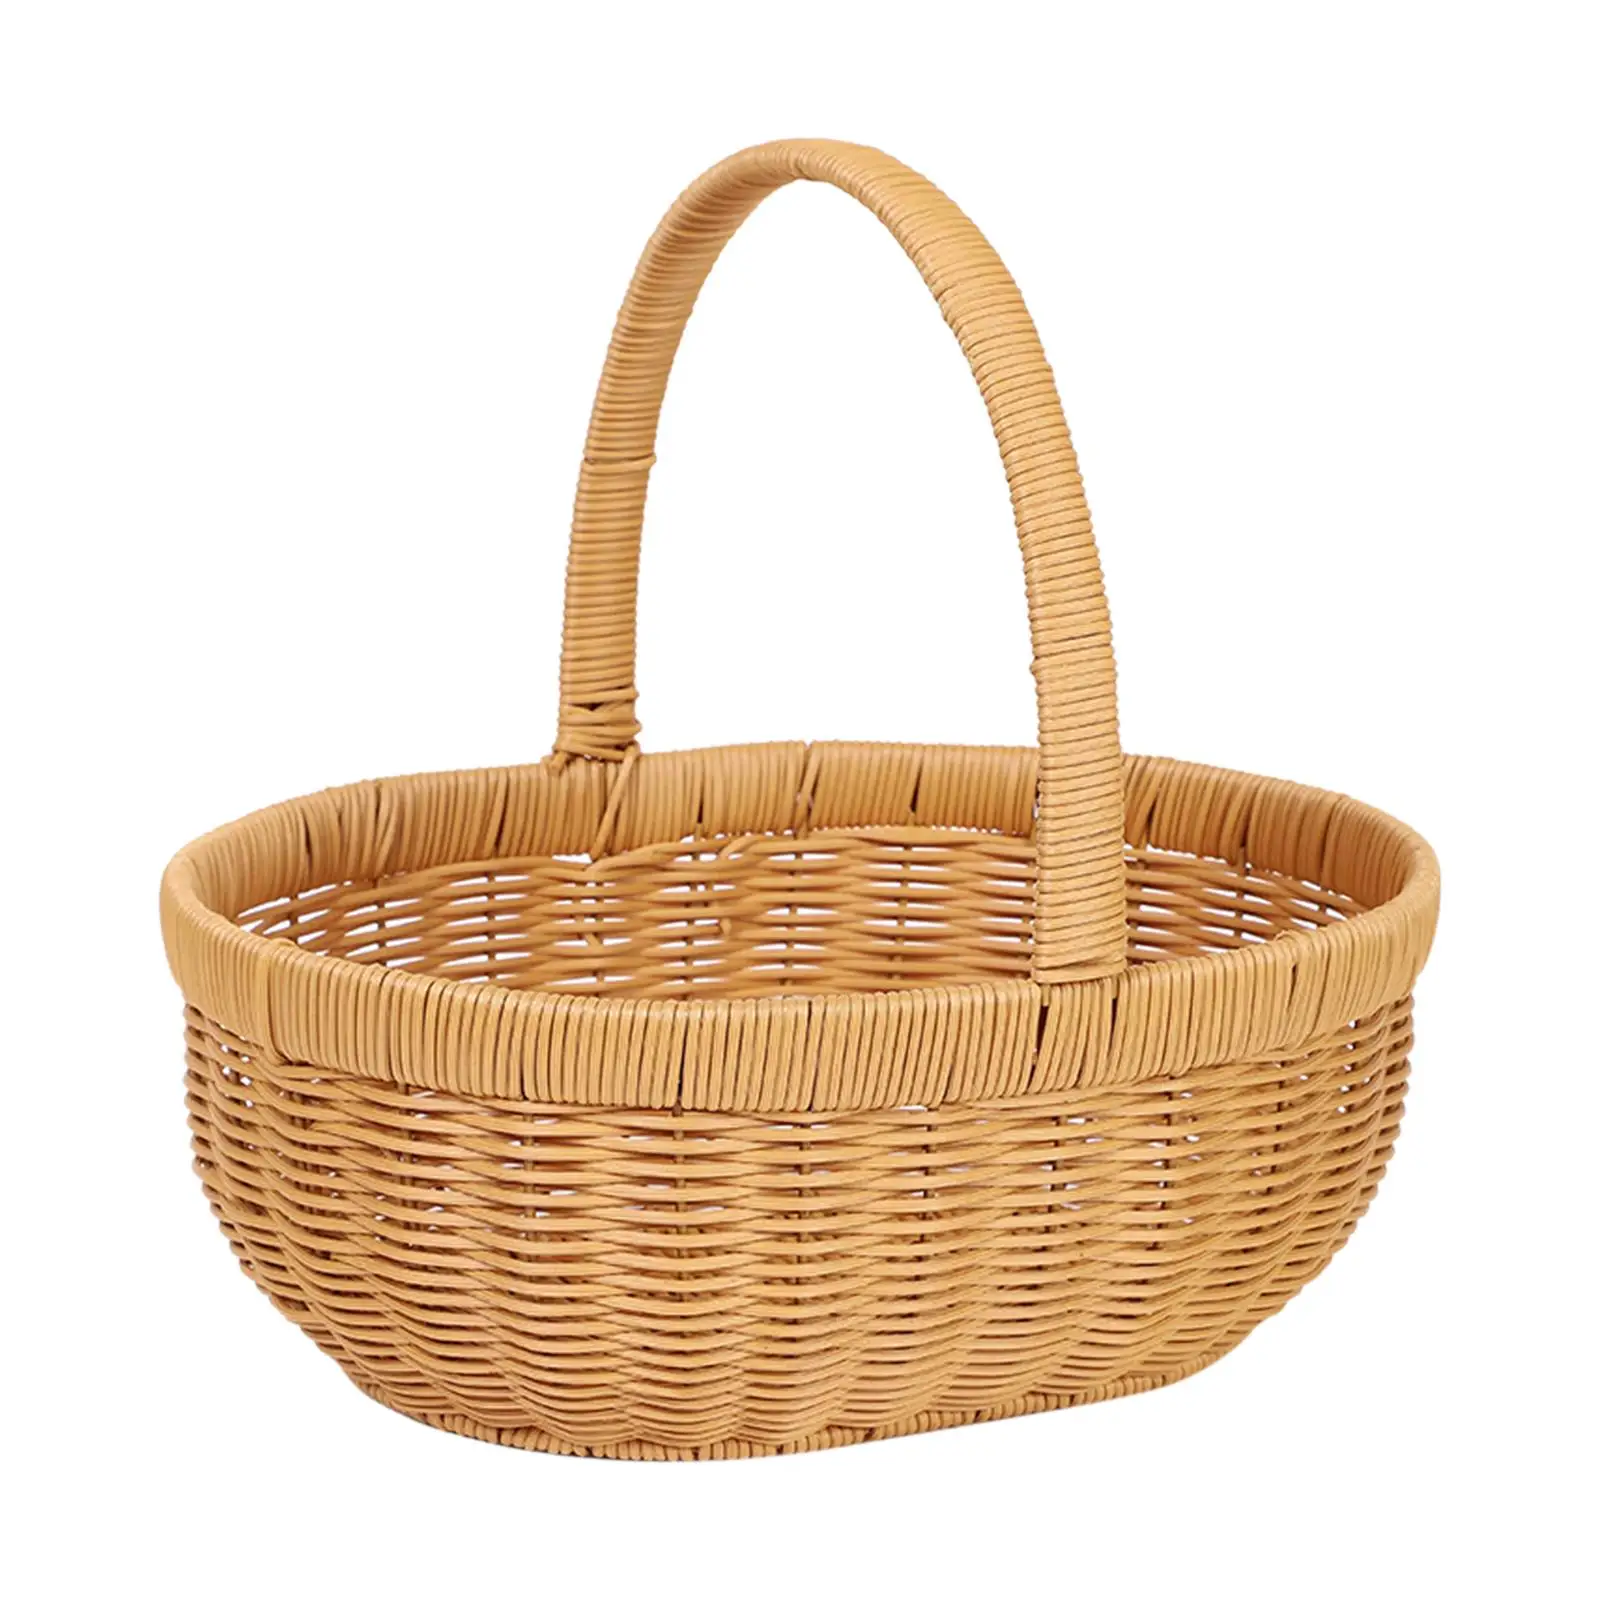 Hand Woven Basket with Handle Shopping Basket Imitation Rattan for Home Garden Simple and Practical Toiletries Holder Versatile